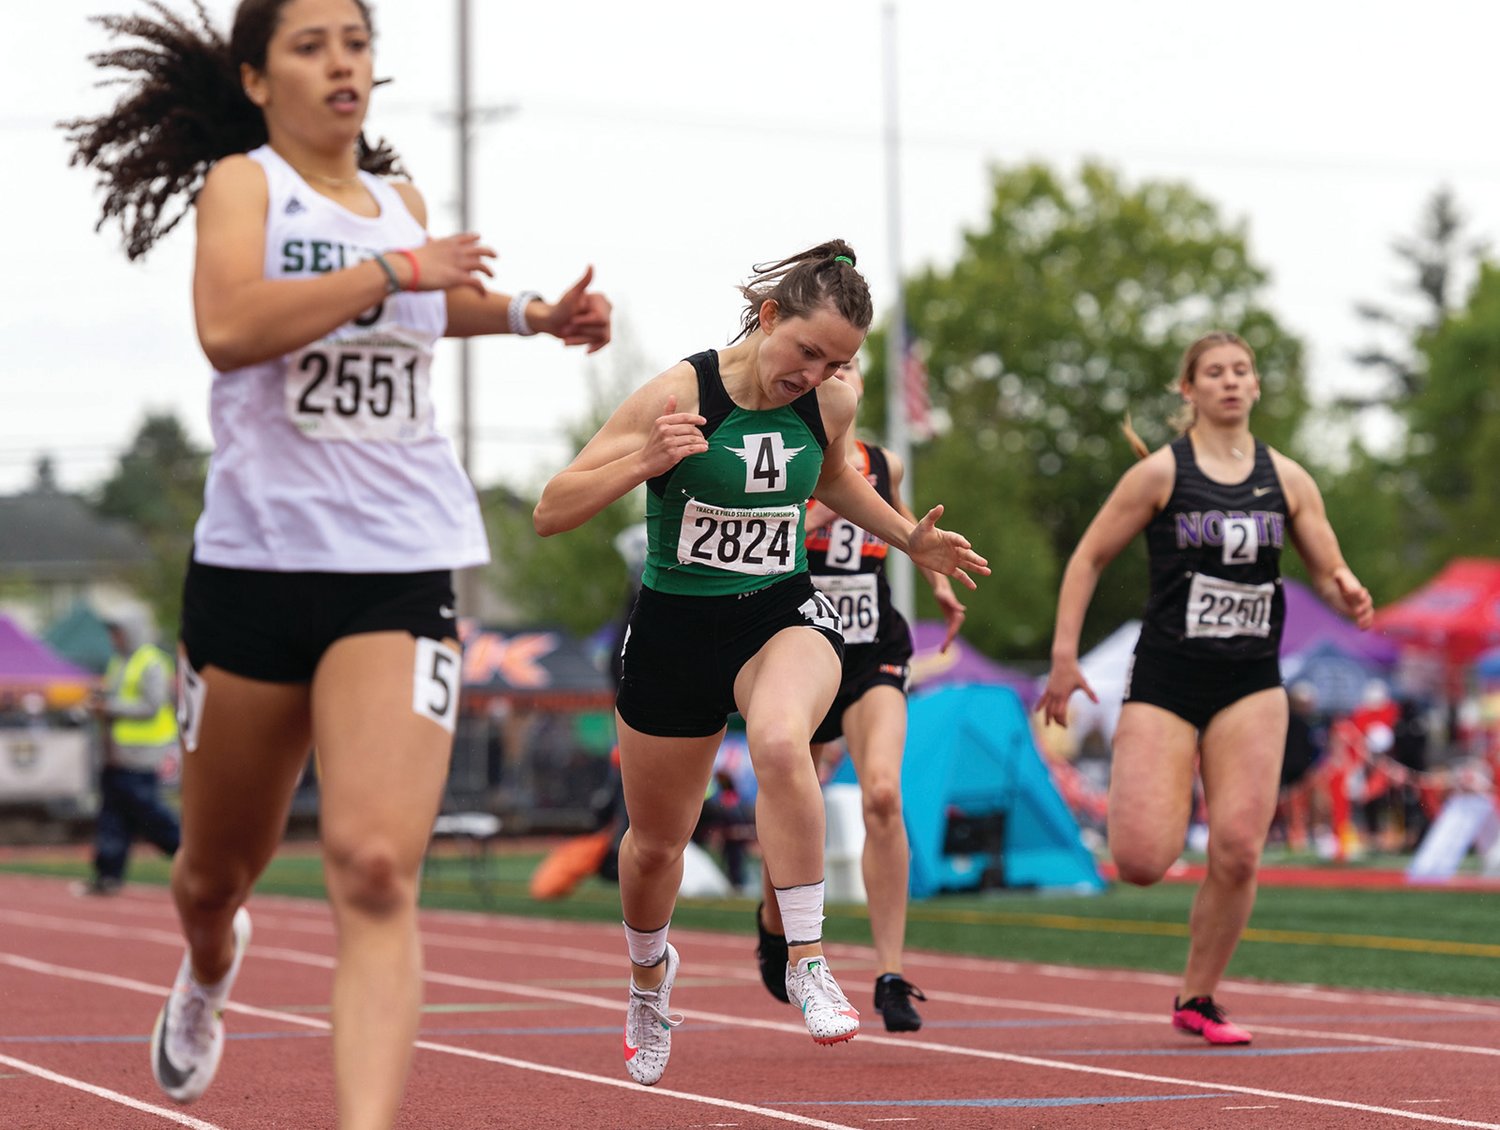 Tumwater's Annabelle Clapp crosses the finish line in the 2A Girls 400 at the 4A/3A/2A State Track and Field Championships on Saturday, May 28, 2022, at Mount Tahoma High School in Tacoma. (Joshua Hart/For The Chronicle)